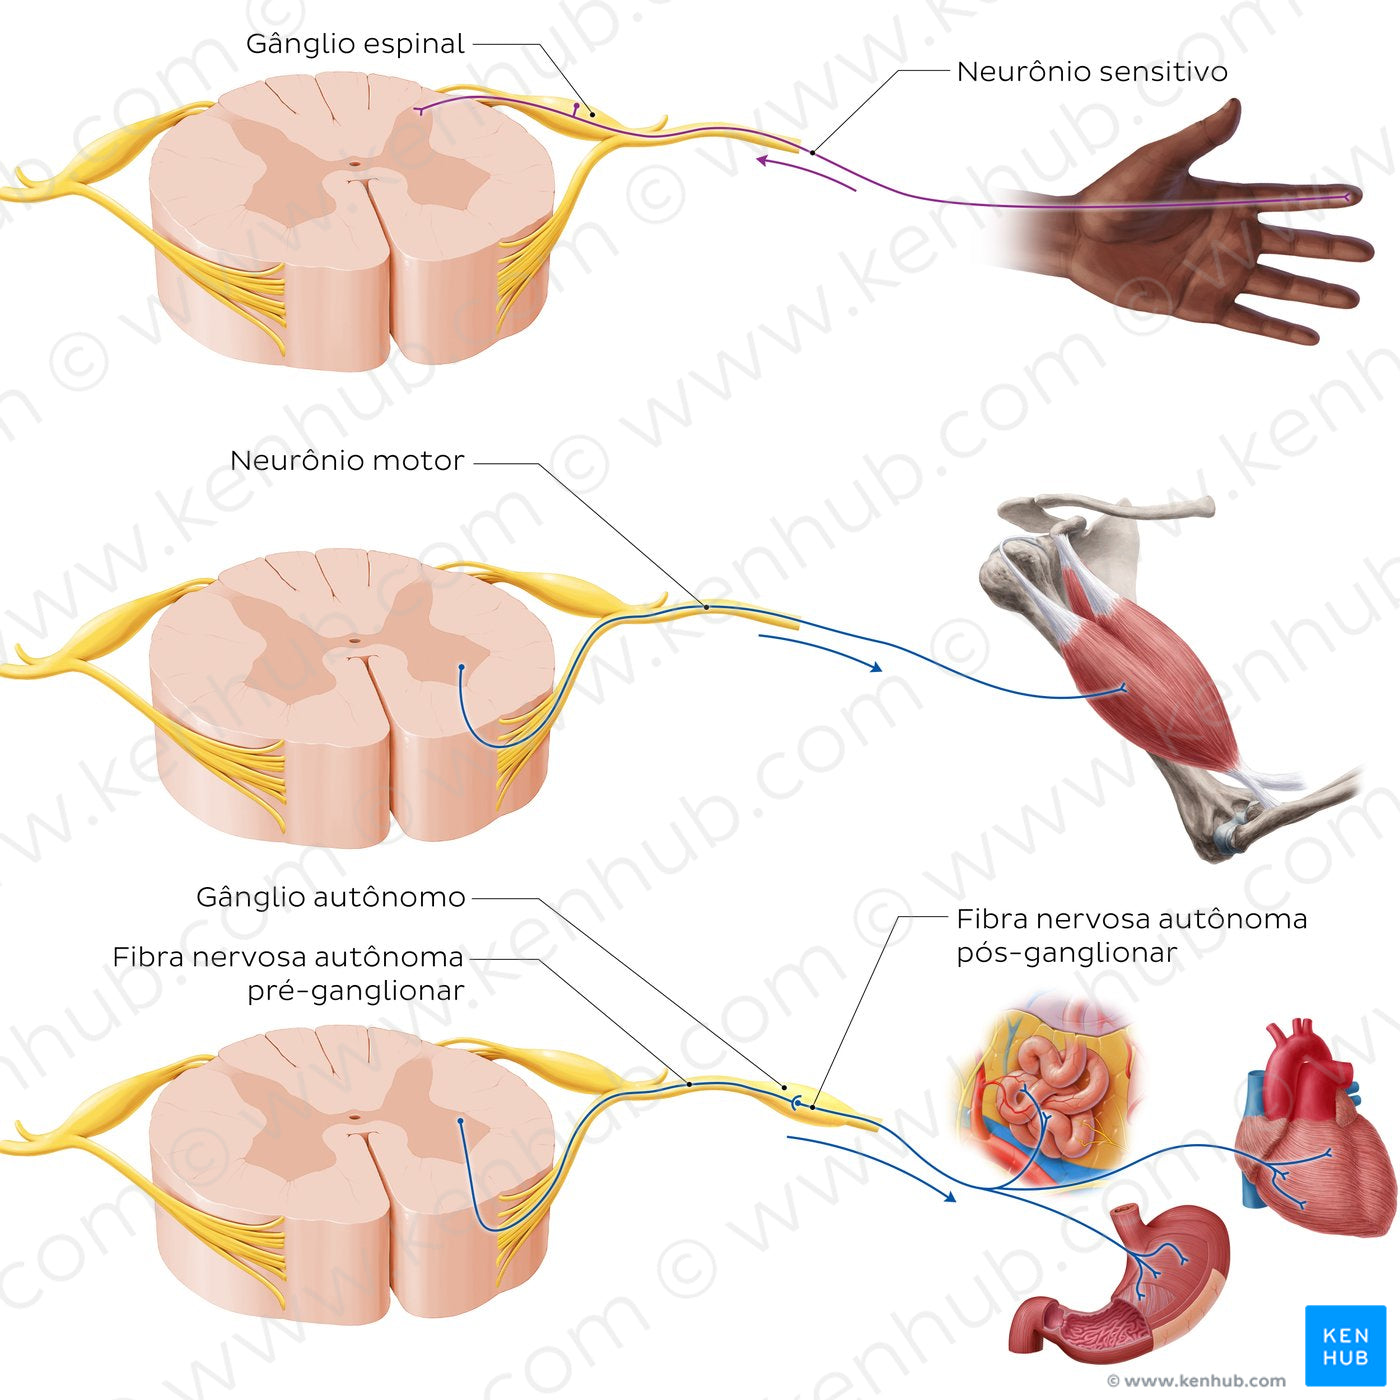 Types of nerves and ganglia (Portuguese)